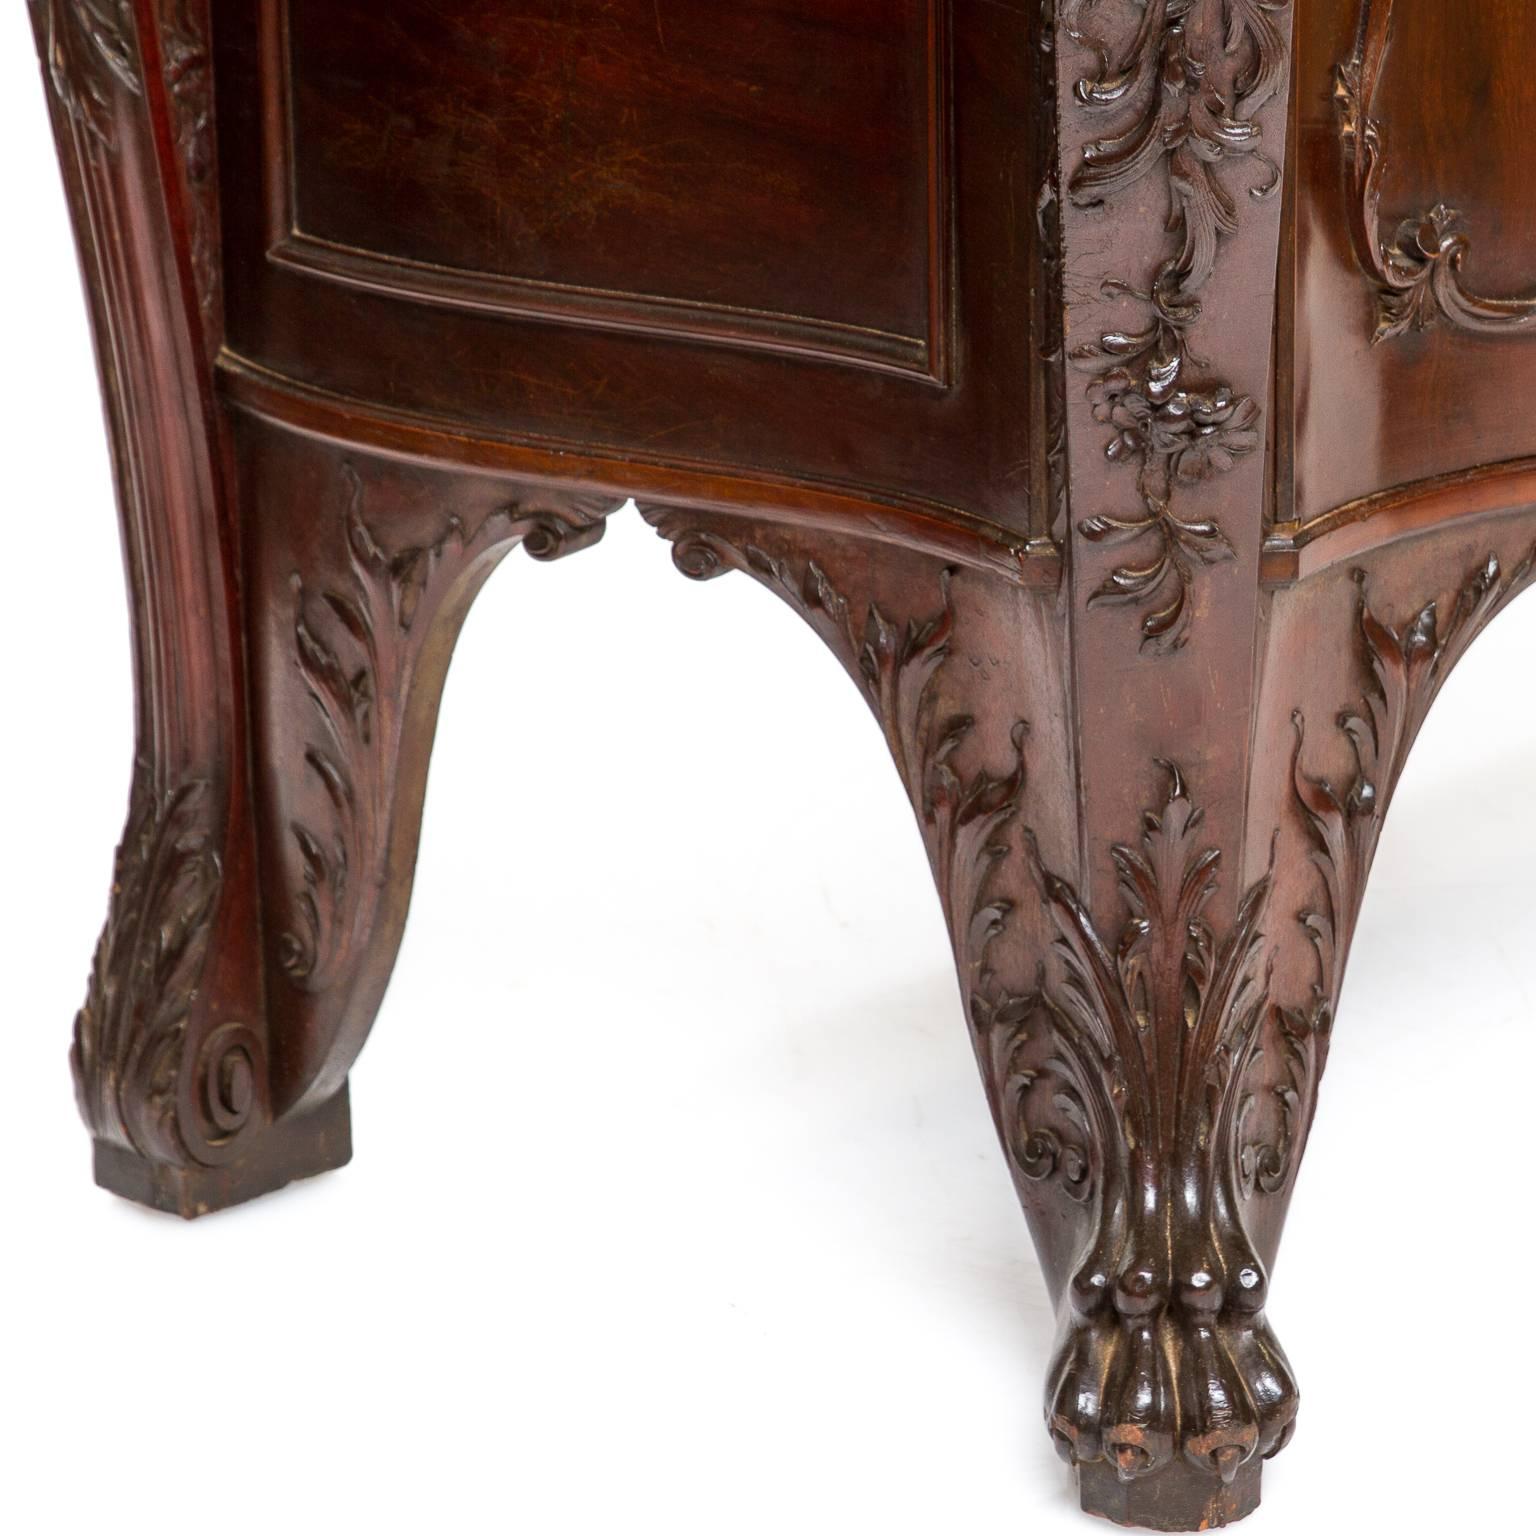 Chippendale 19th Century English Mahogany Commode signed 